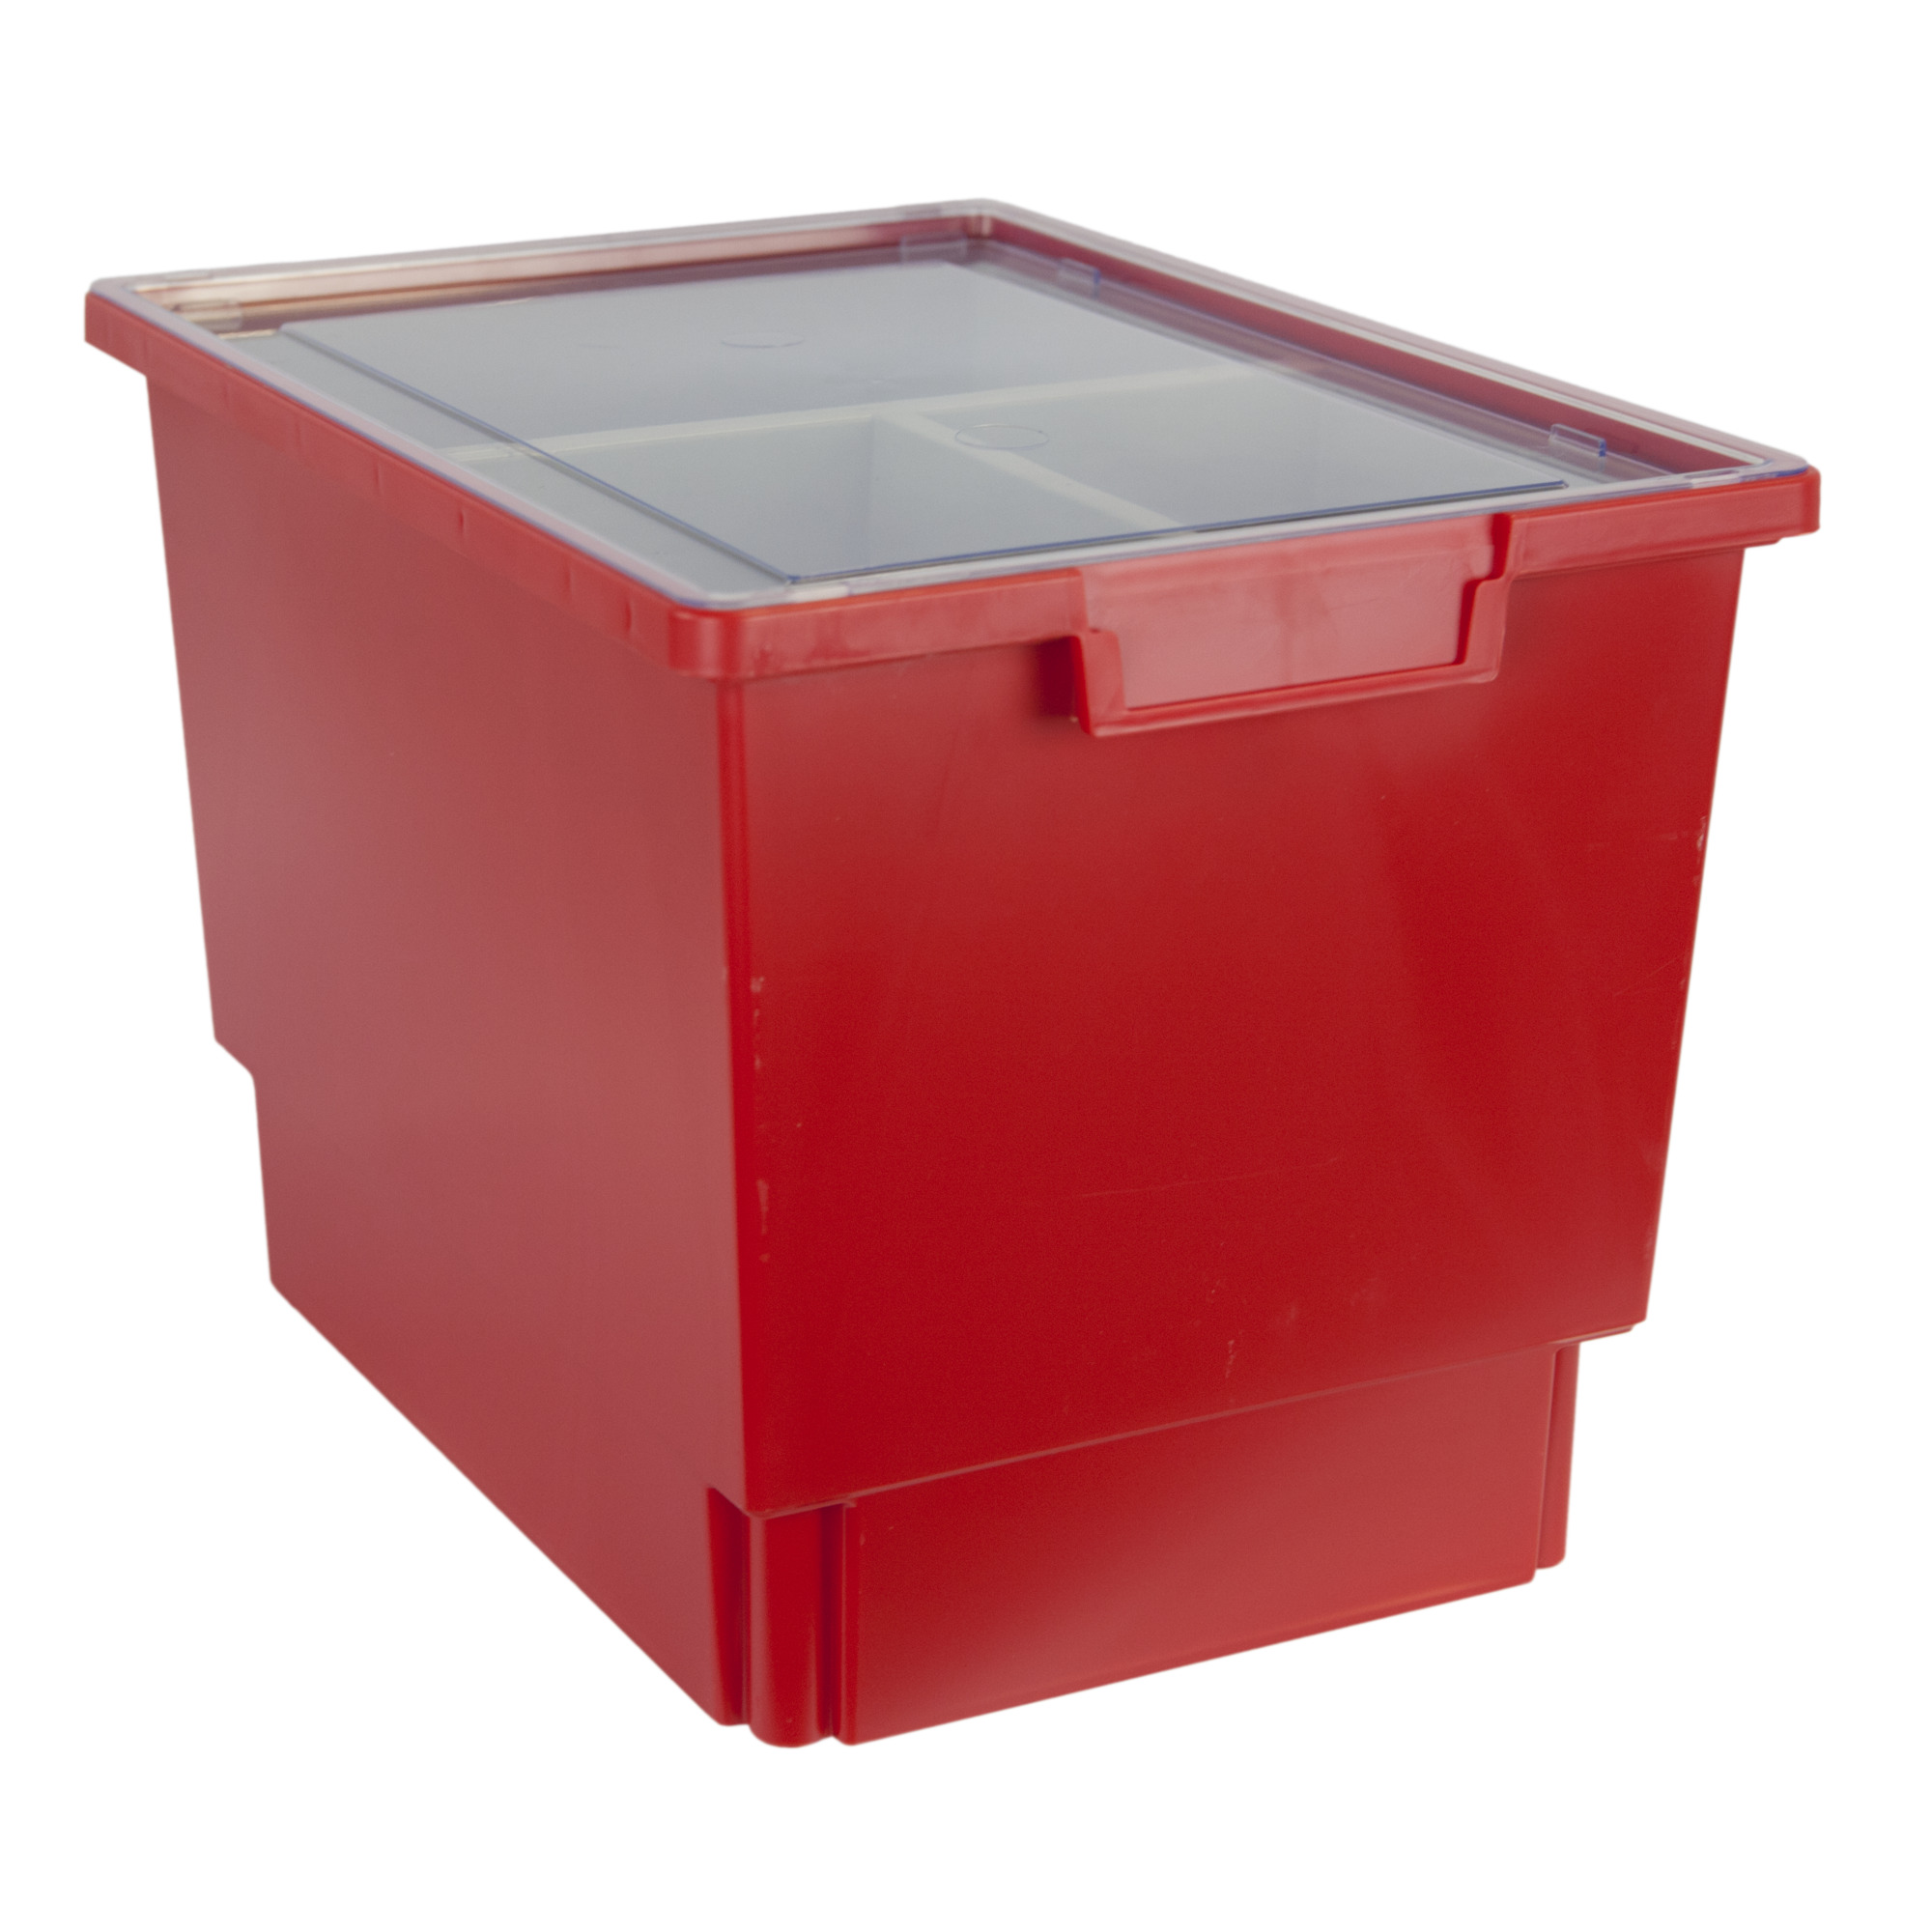 StorWerks, Slim Line 12Inch Tray Kit (3 x Inserts) Red, Included (qty.) 1, Material Plastic, Height 12 in, Model - Certwood CE1954PR-NK0004-1